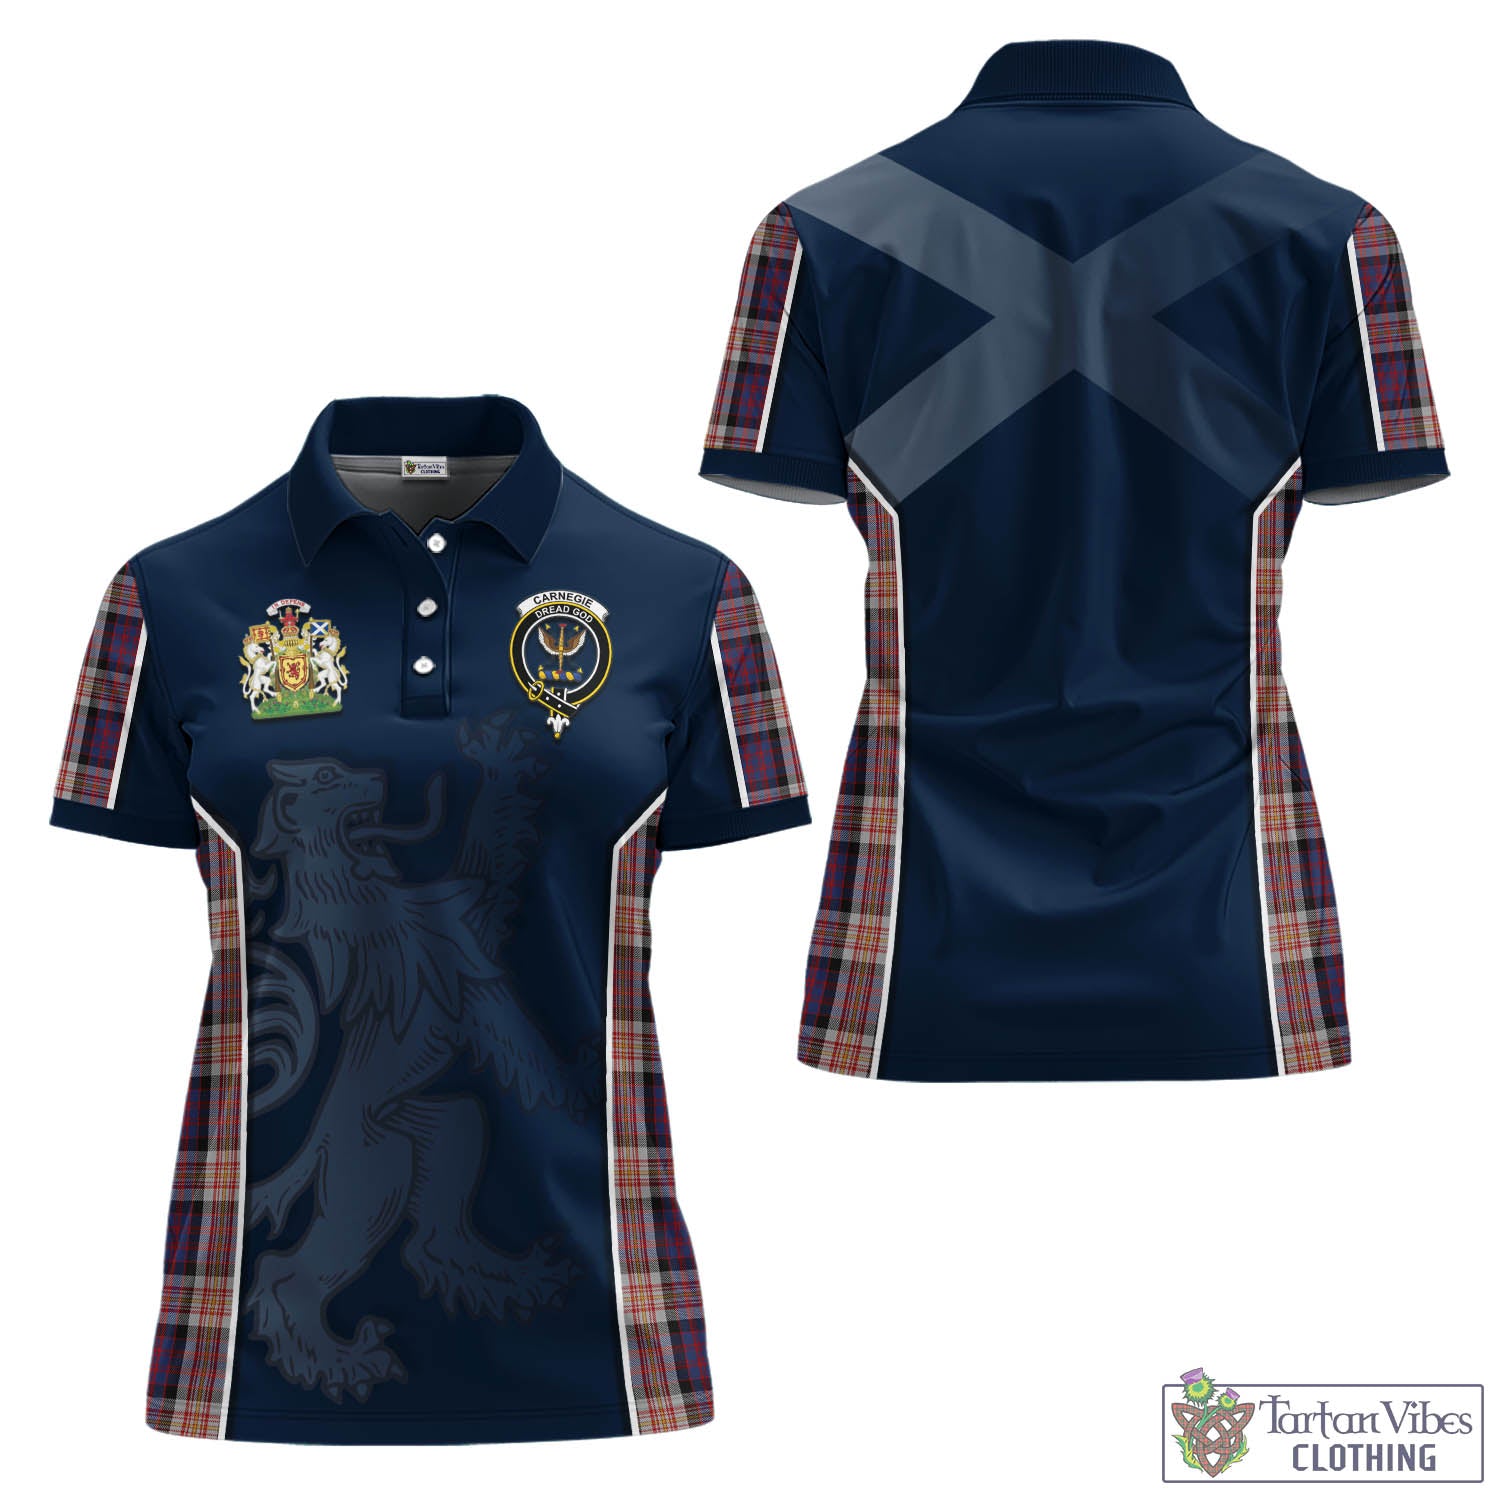 Tartan Vibes Clothing Carnegie Tartan Women's Polo Shirt with Family Crest and Lion Rampant Vibes Sport Style